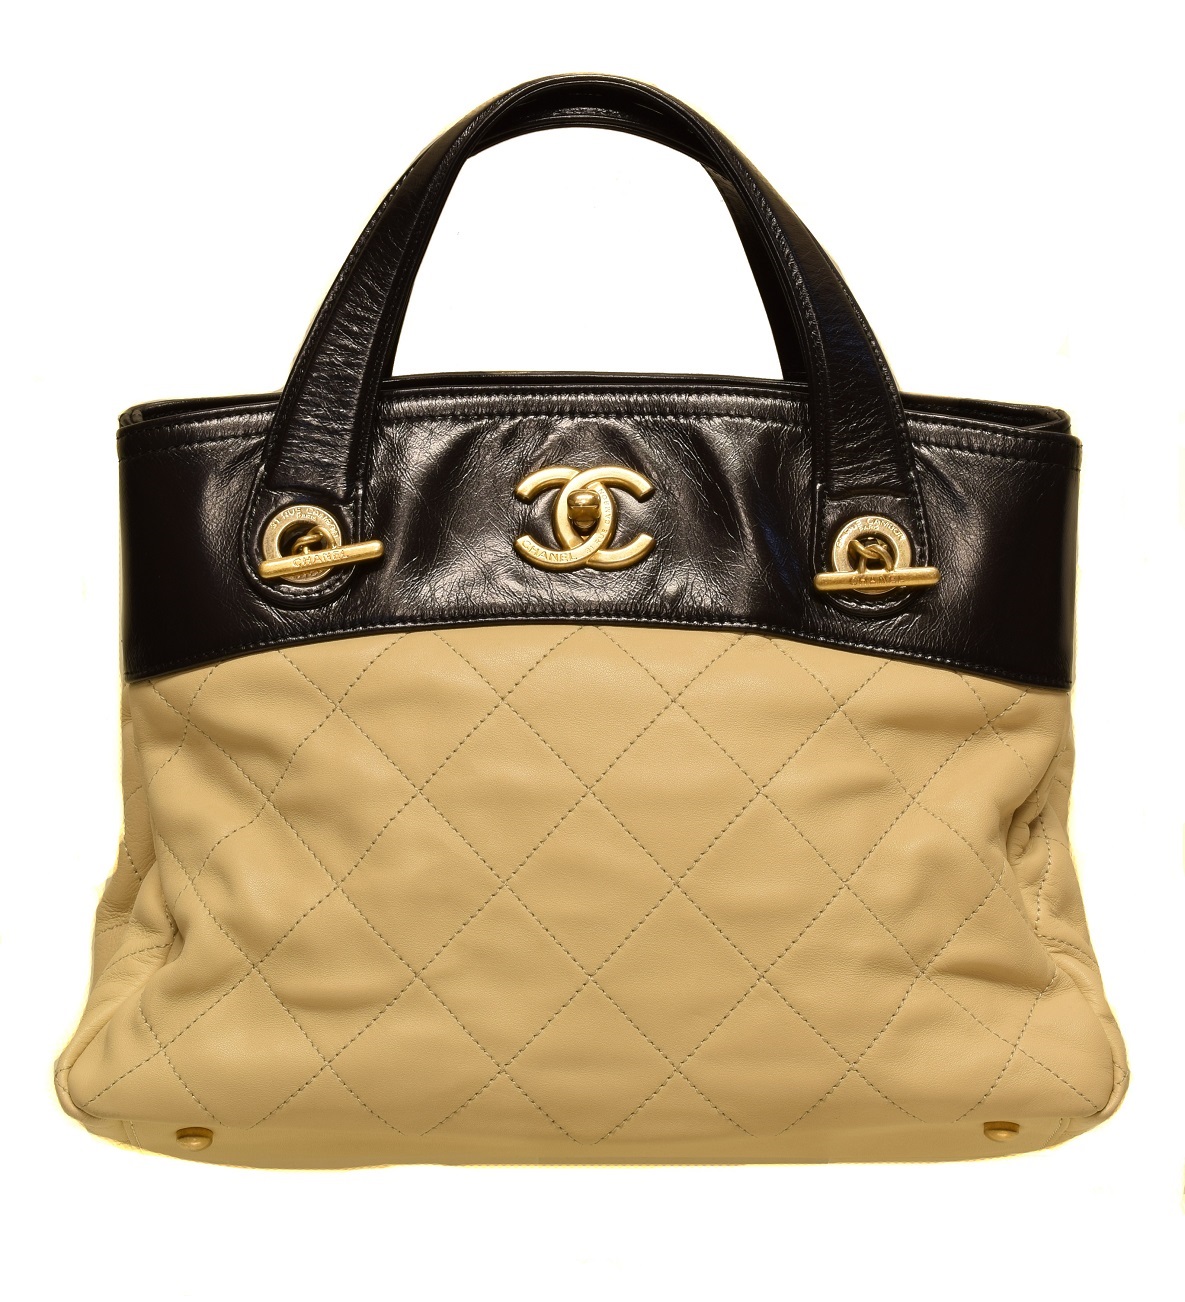 15 Phenomenal Quilted Bags That Look Like Chanel for Way Less